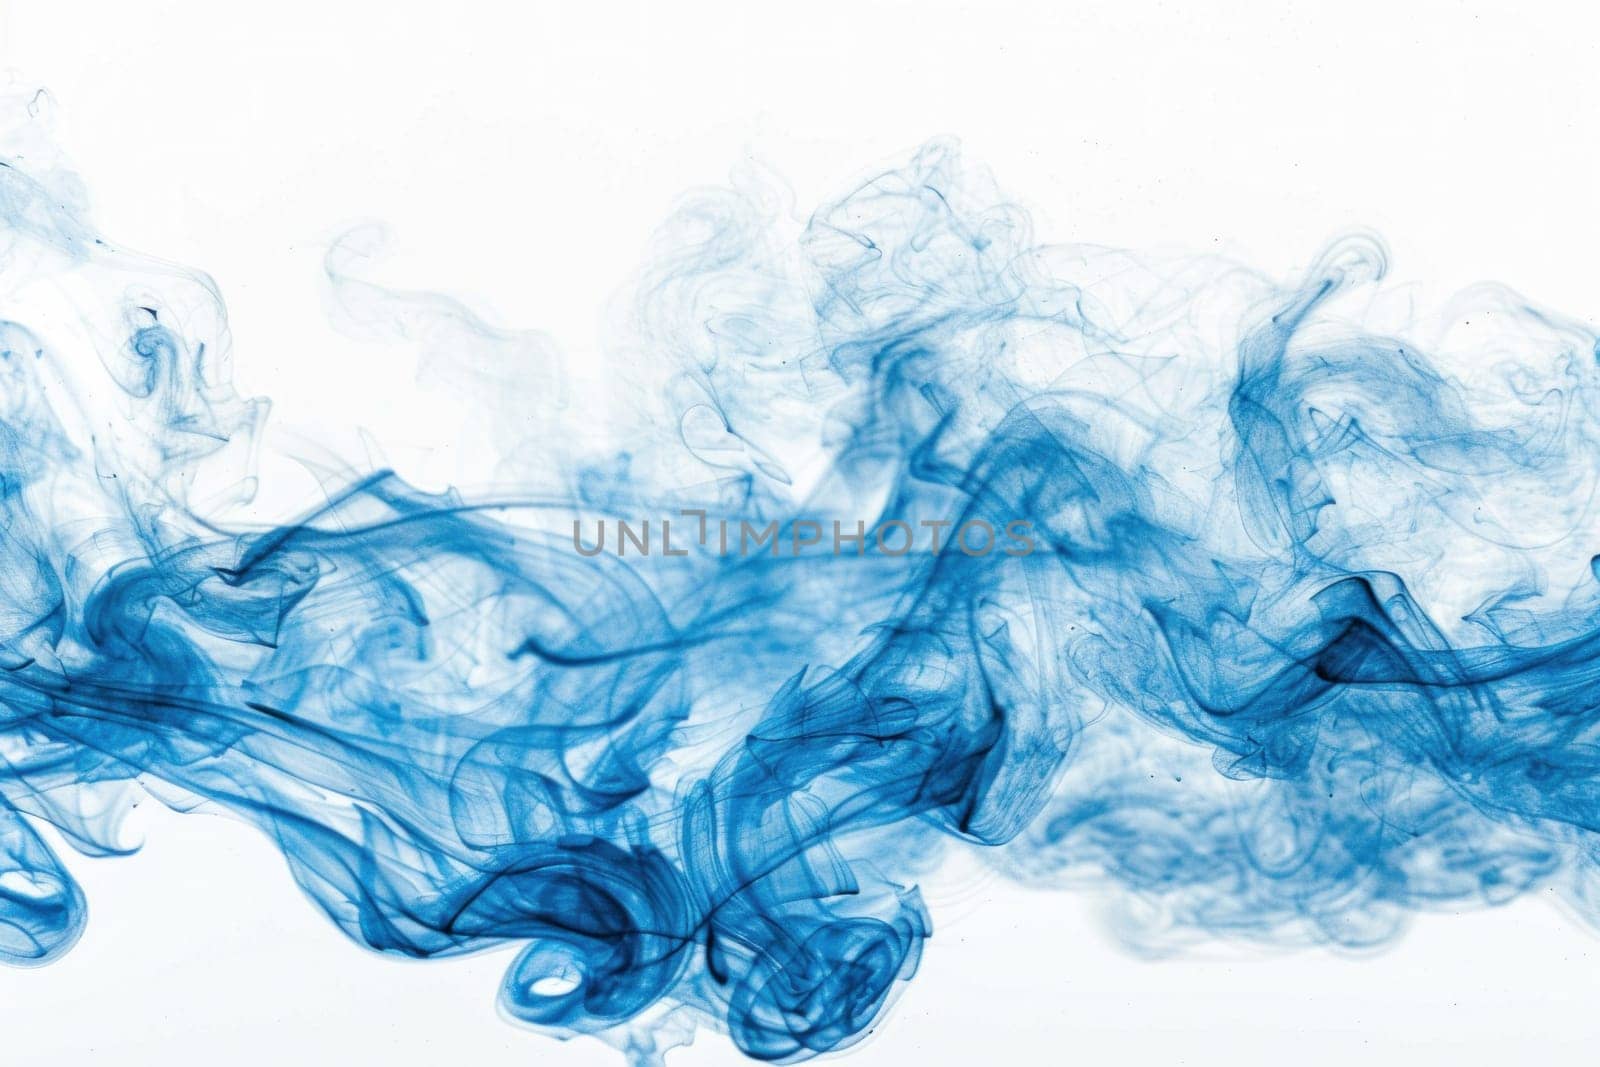 Blue smoke on white background with copy space for blue and smoke words, ethereal beauty of abstract concept art in travel and fashion industry by Vichizh